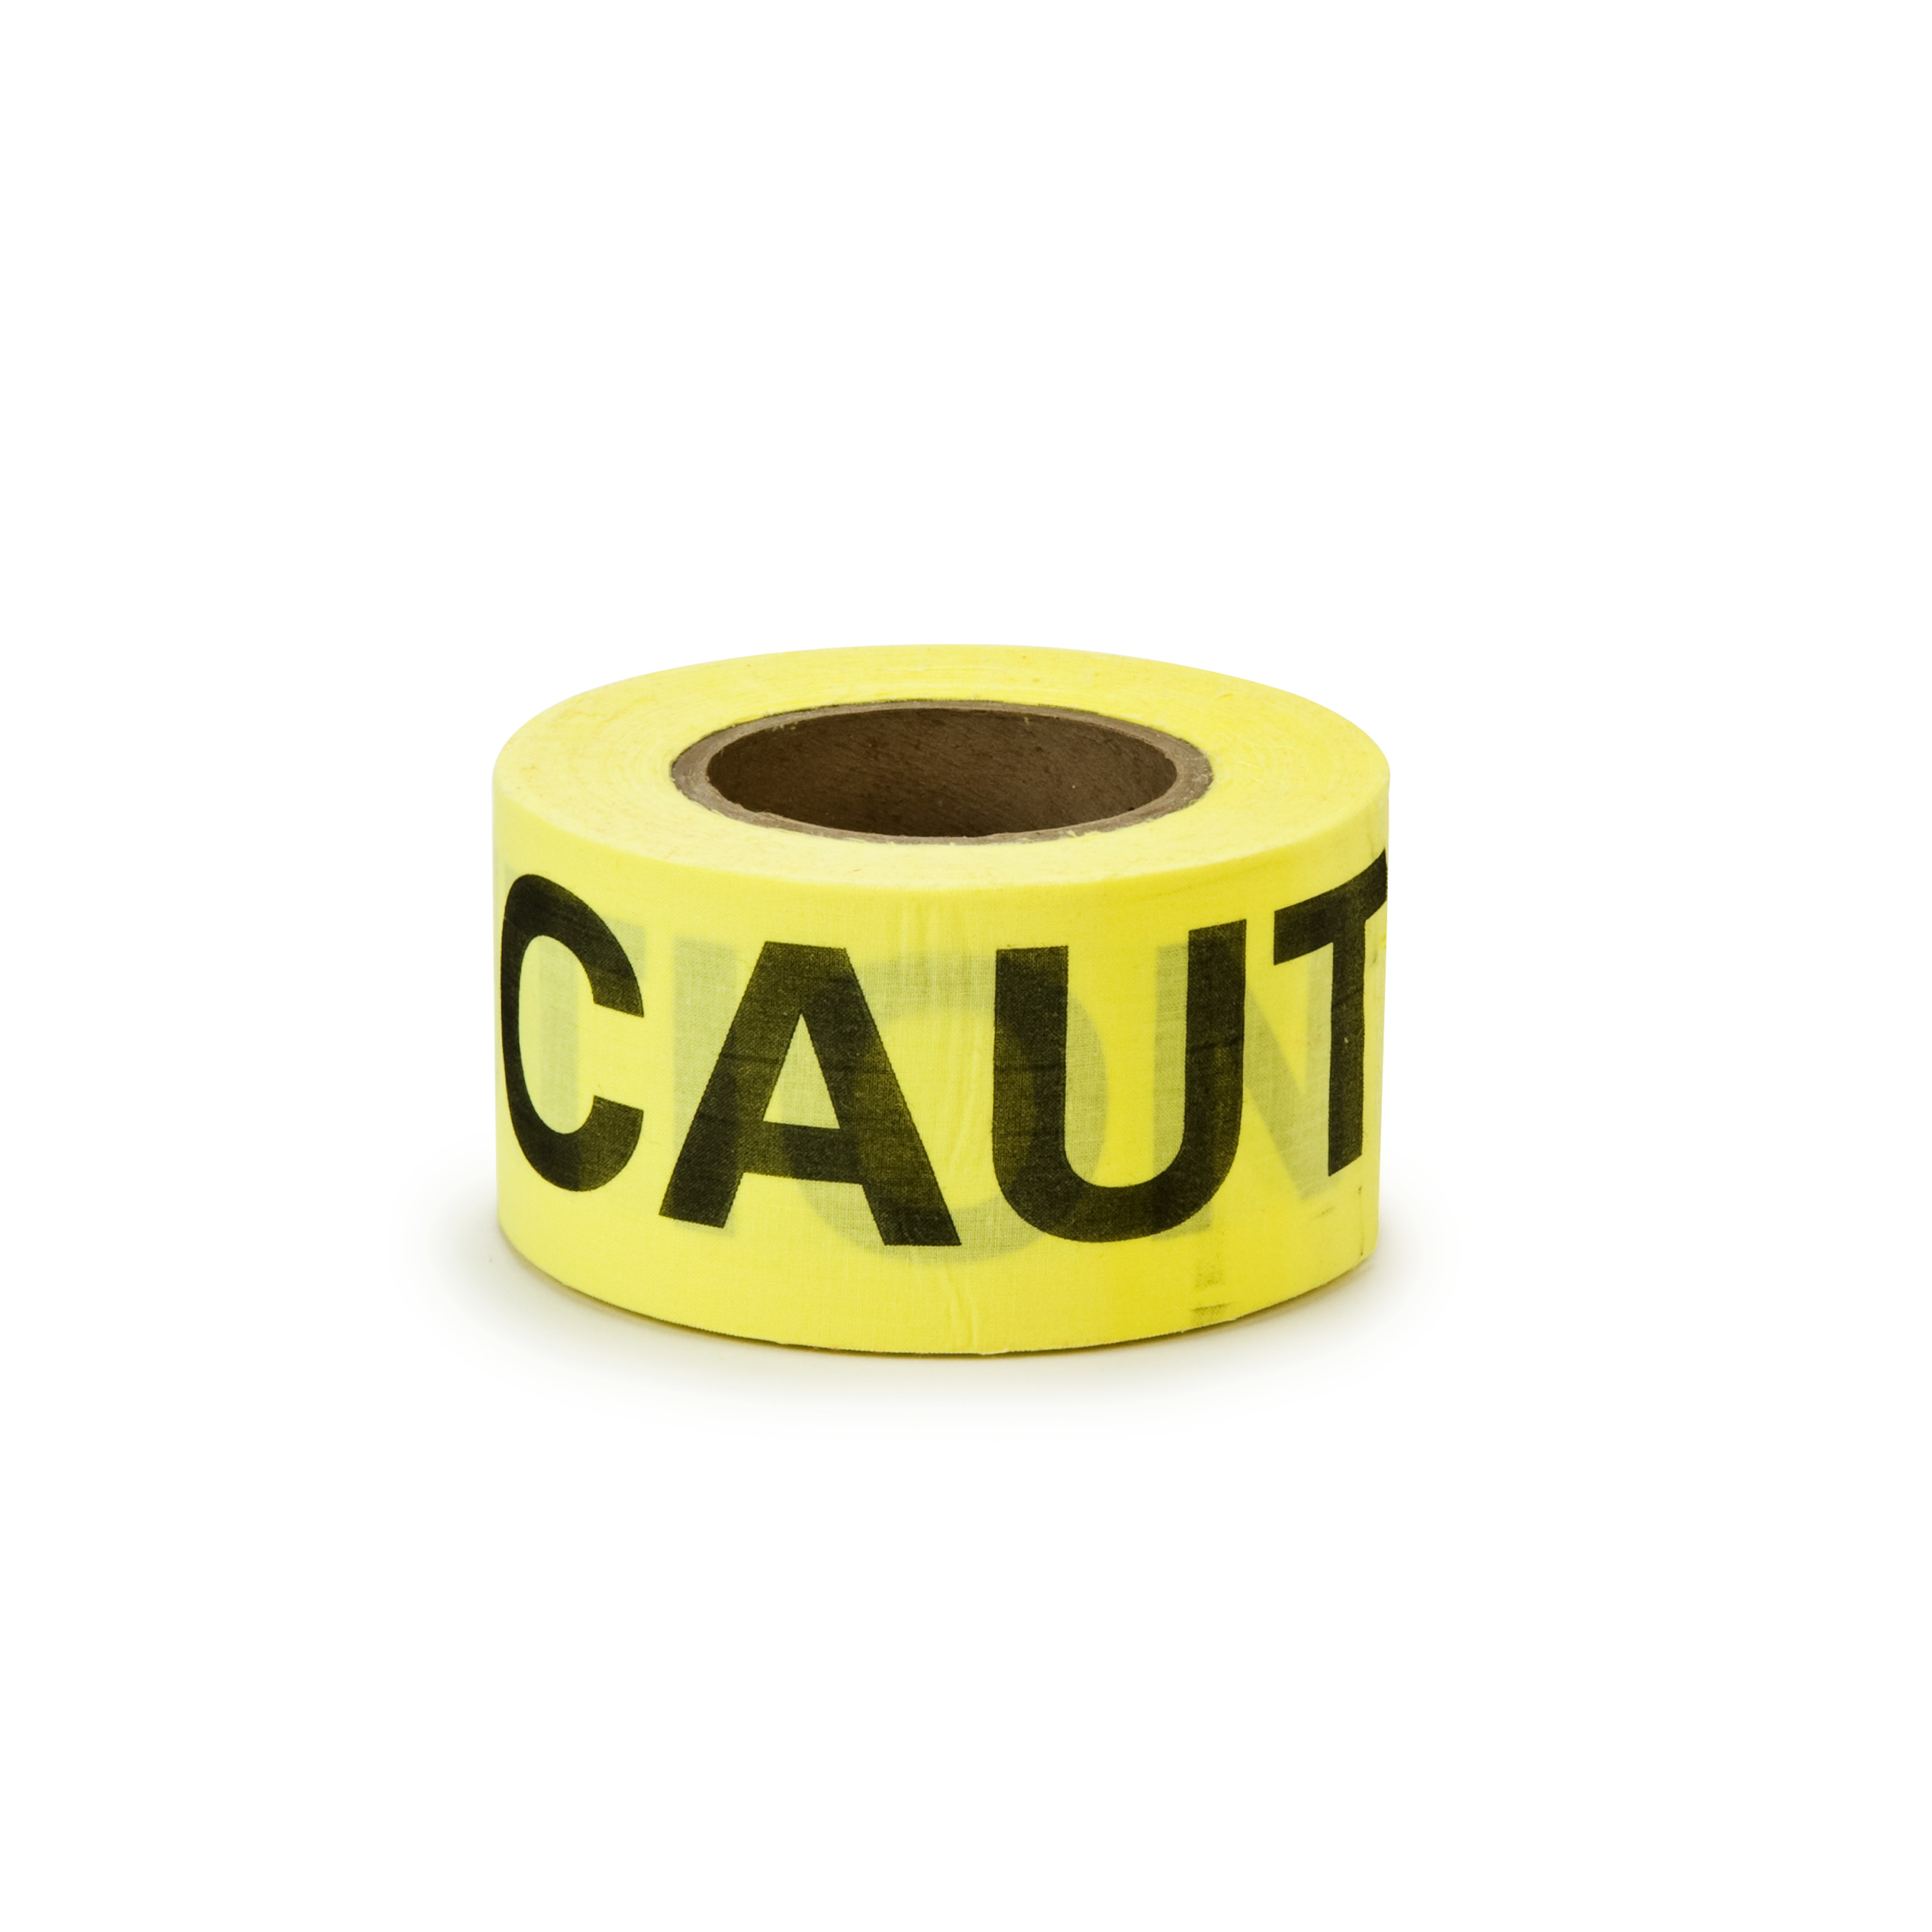 Scotch® Repulpable Barricade Tape 516, CAUTION, 3 in x 150 ft, Yellow, 8
rolls/Case